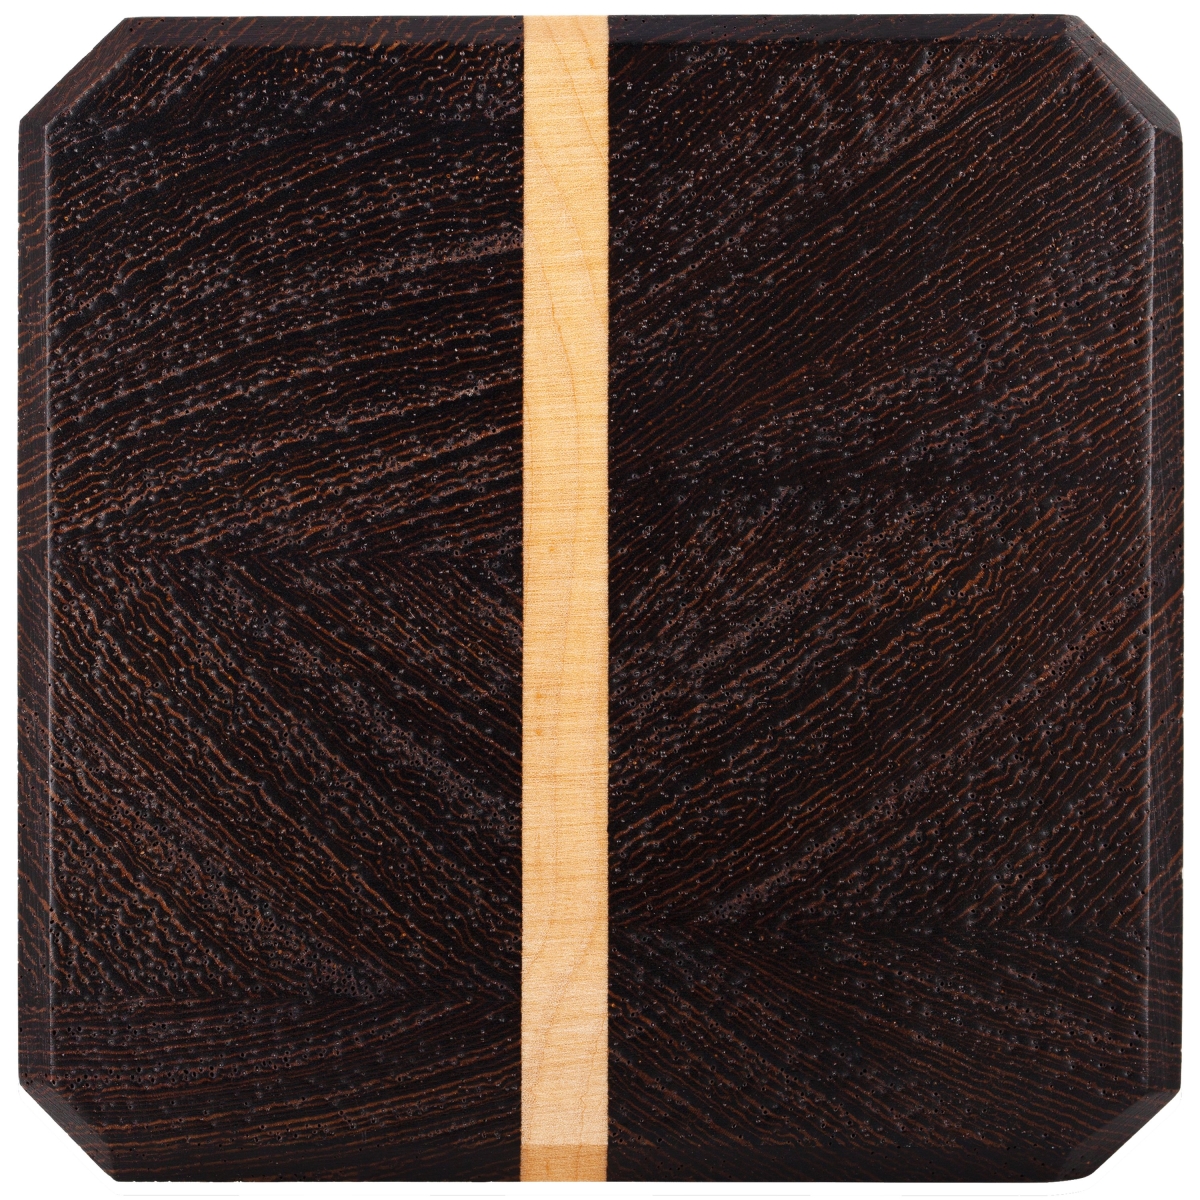 Picture of A & E Millwork AEM-5052 Single Maple & Lace Wood Coasters